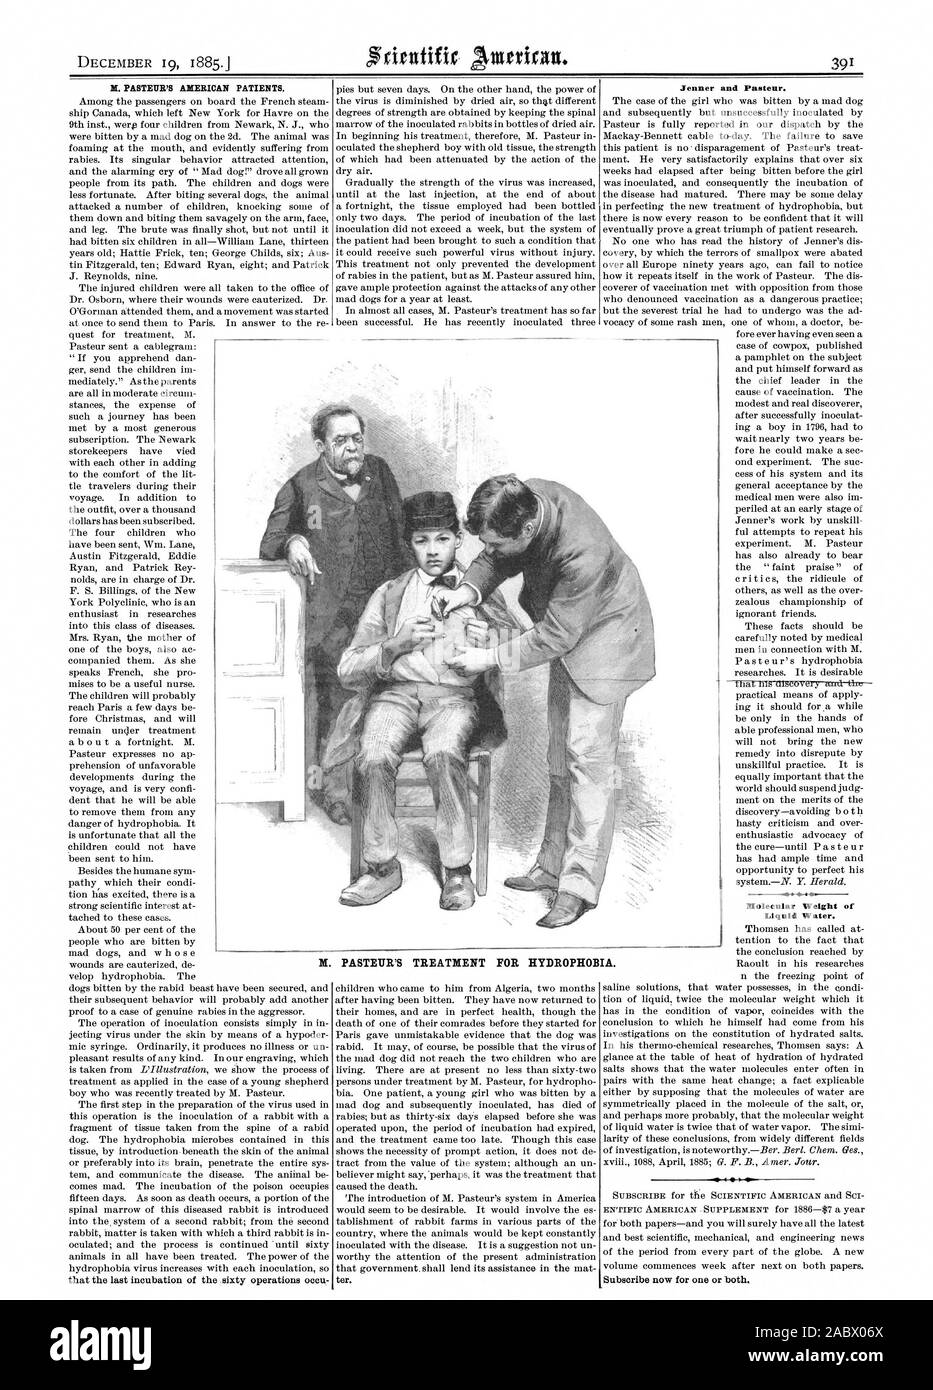 M. PASTEUR'S AMERICAN PATIENTS. Jenner and Pasteur. Molecular Weight of Liquid Water. Subscribe now for one or both M. PASTEUR'S TREATMENT FOR HYDROPHOBIA., scientific american, 1885-12-19 Stock Photo